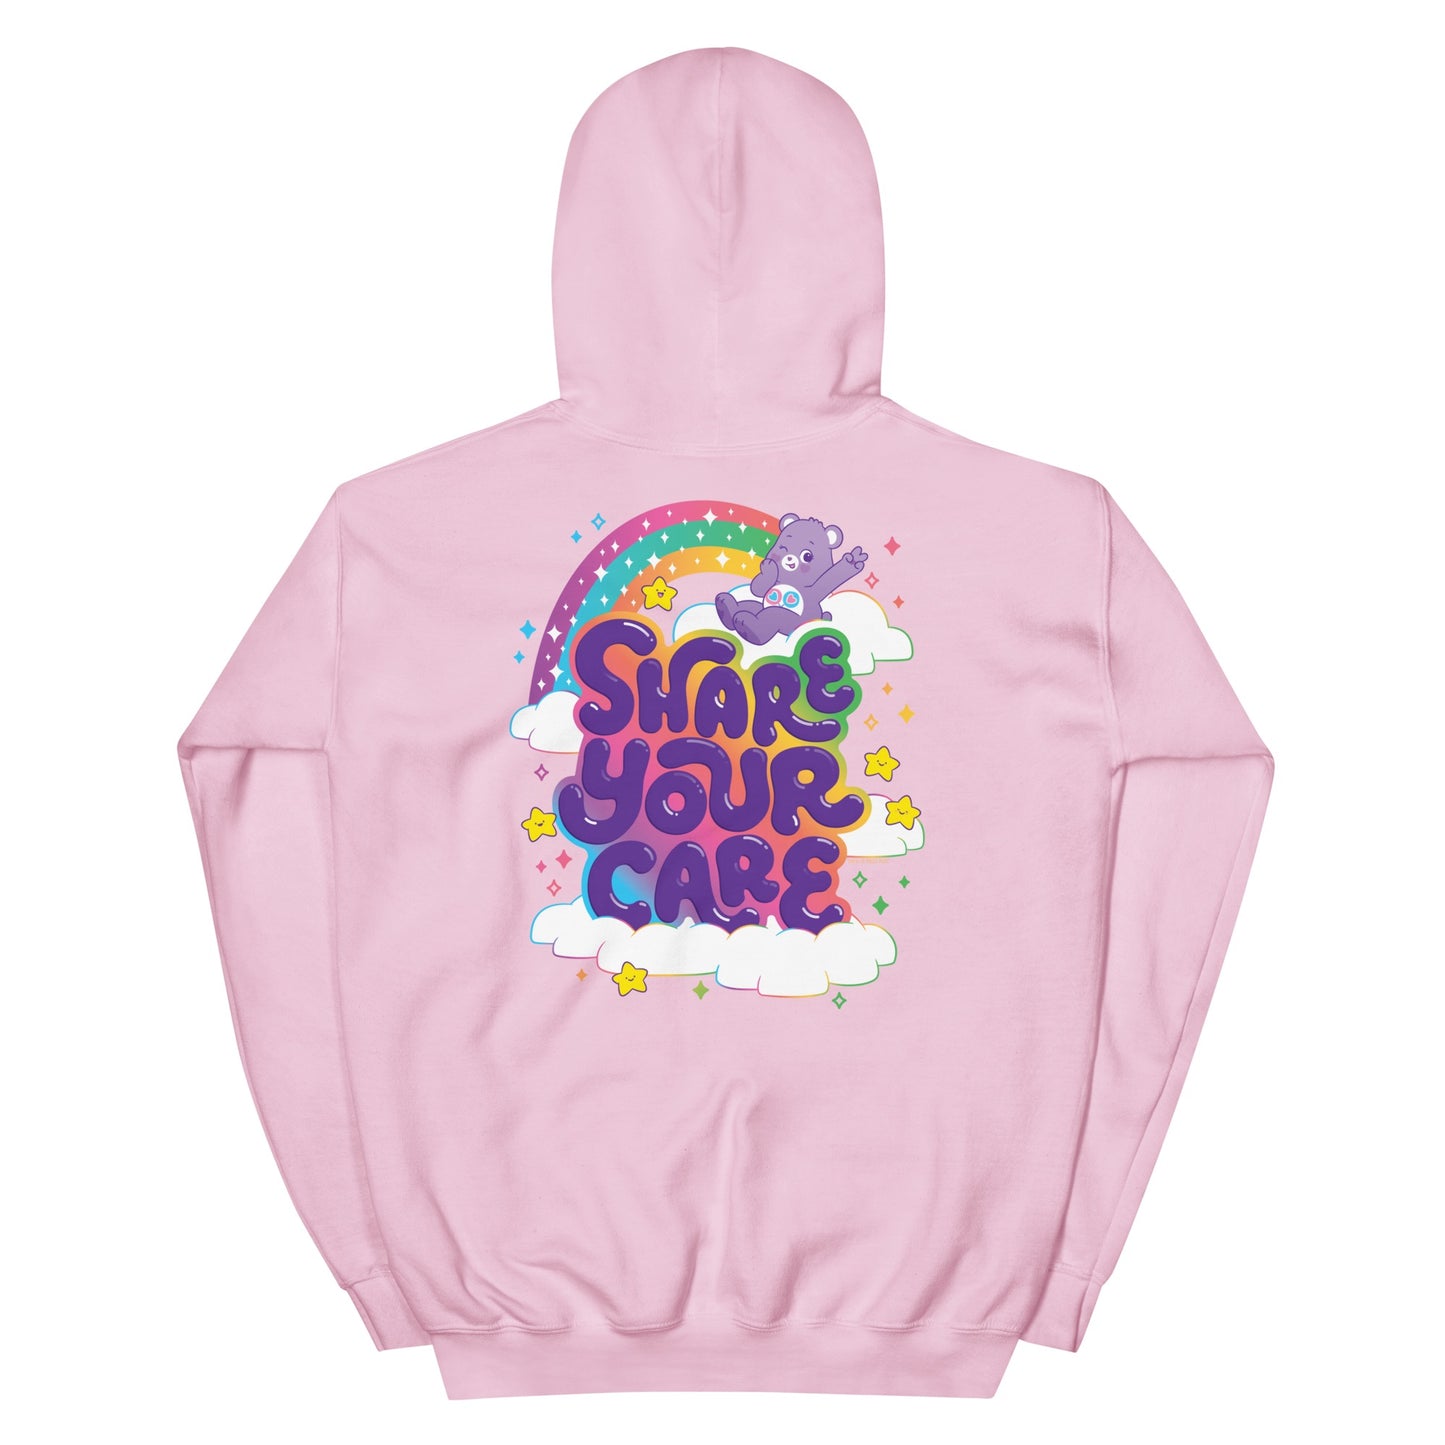 Care Bears Share Your Care Adult Hoodie